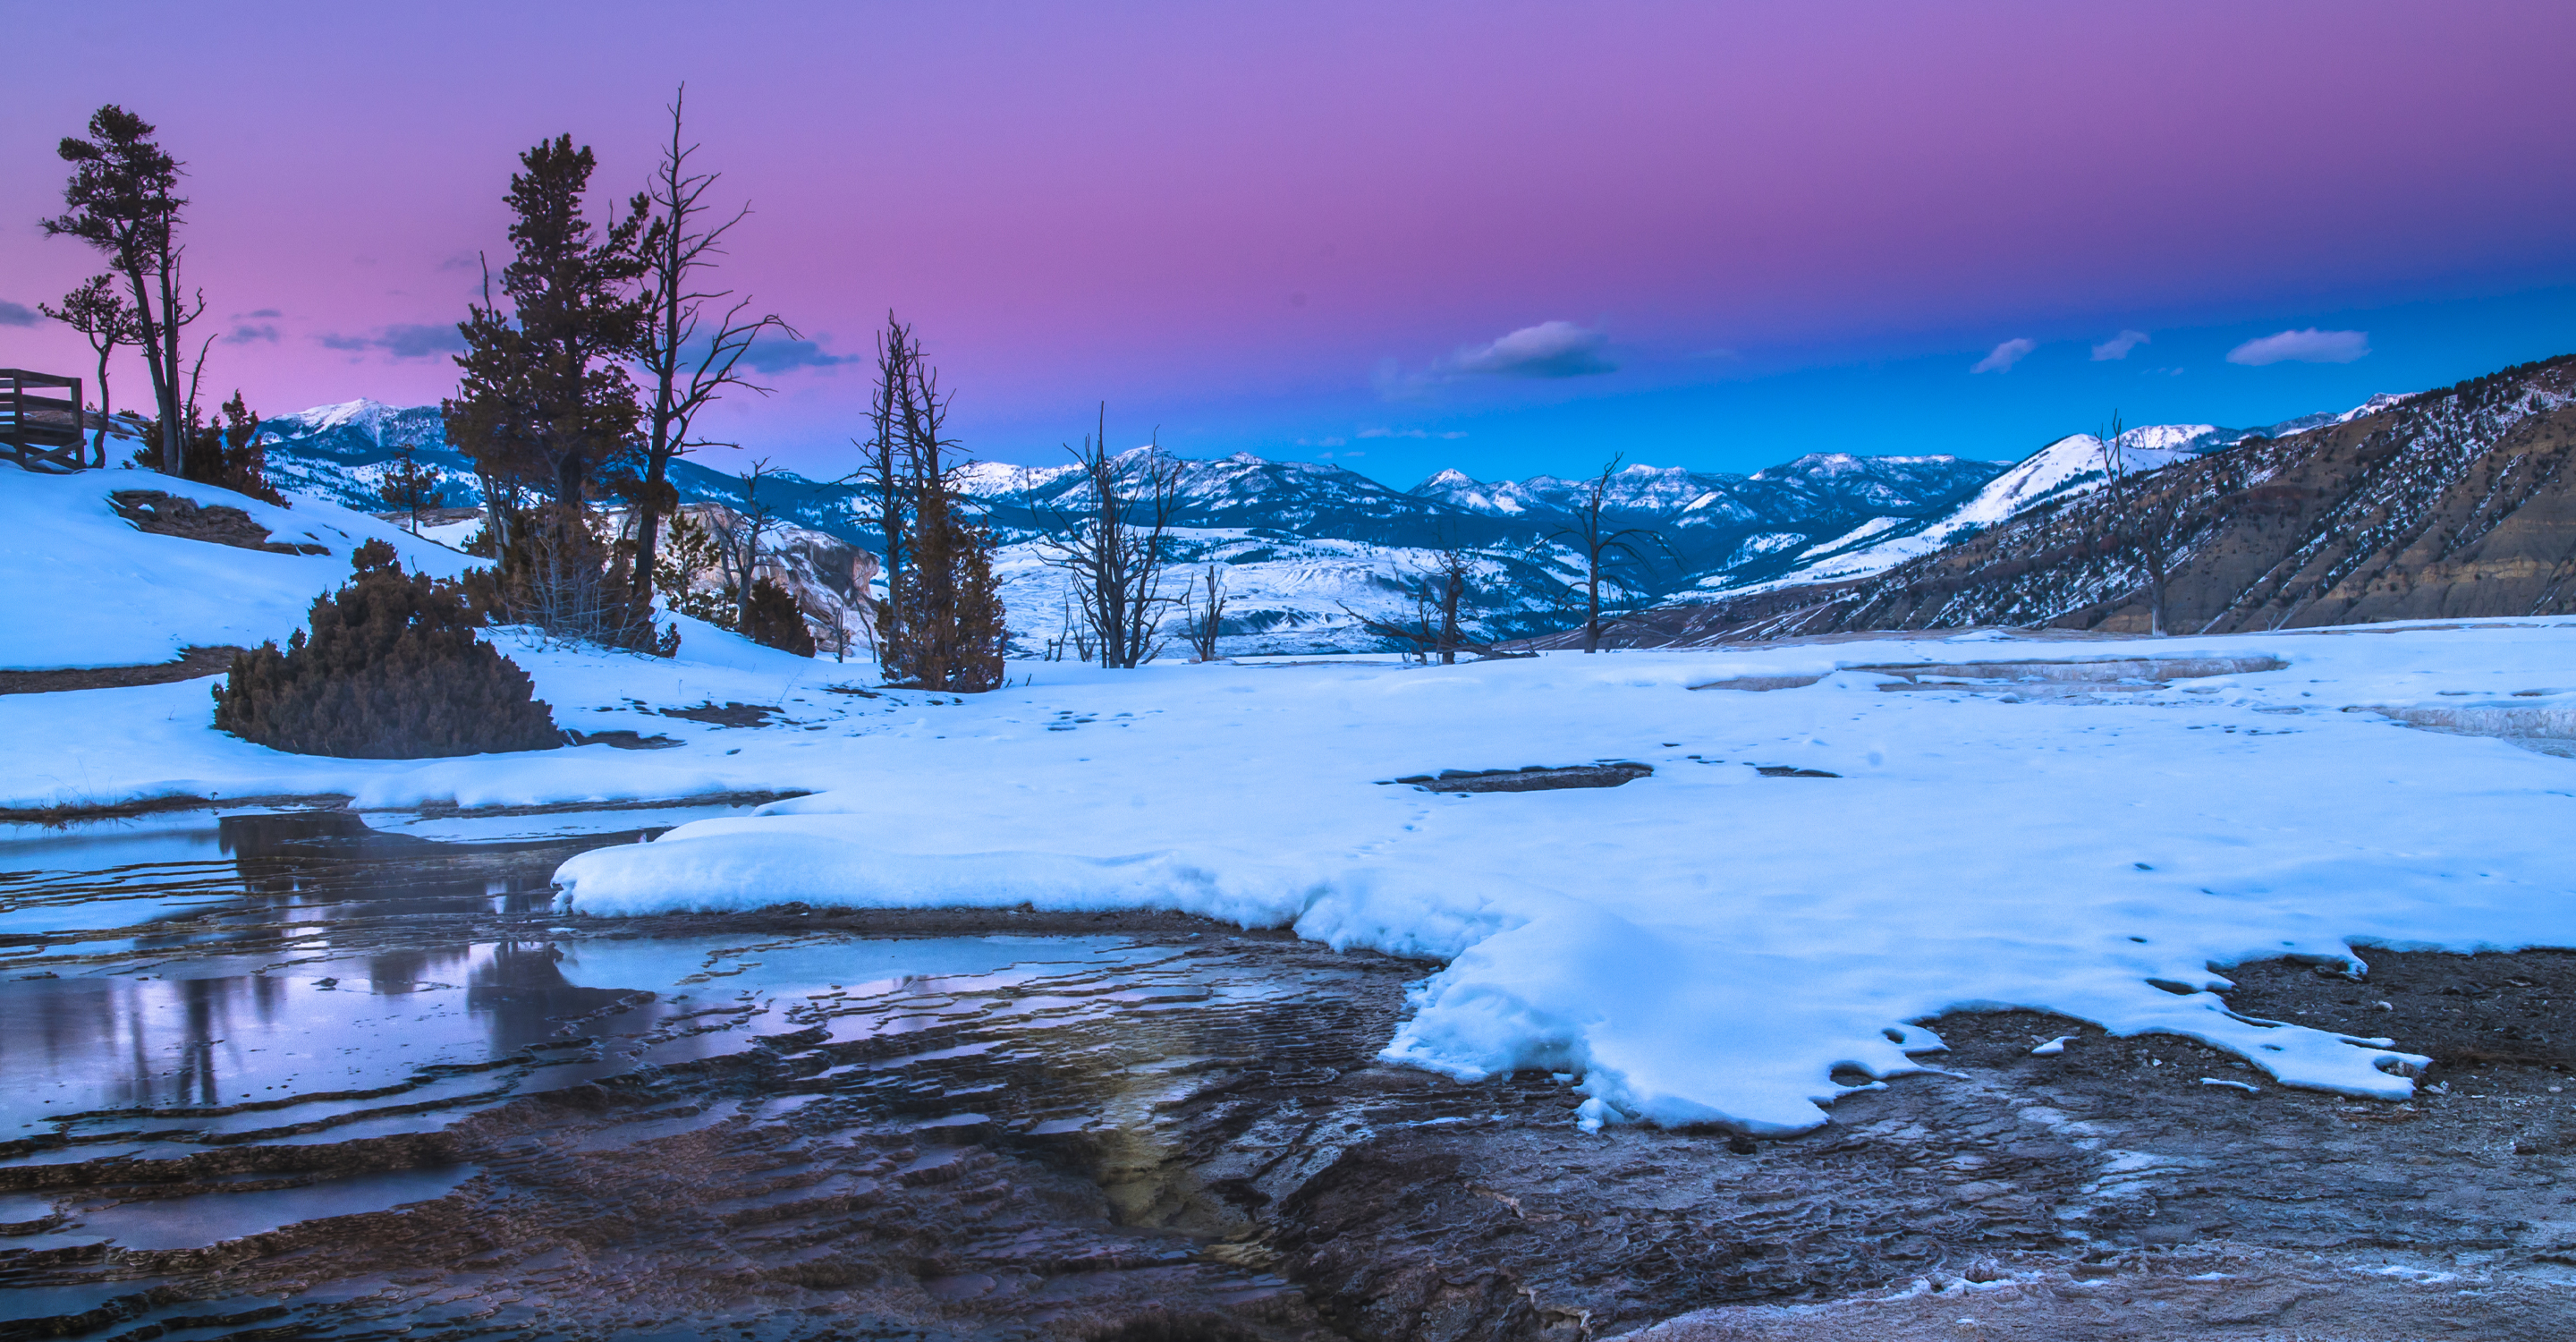 A snowy sunset in Yellowstone National Park, United States